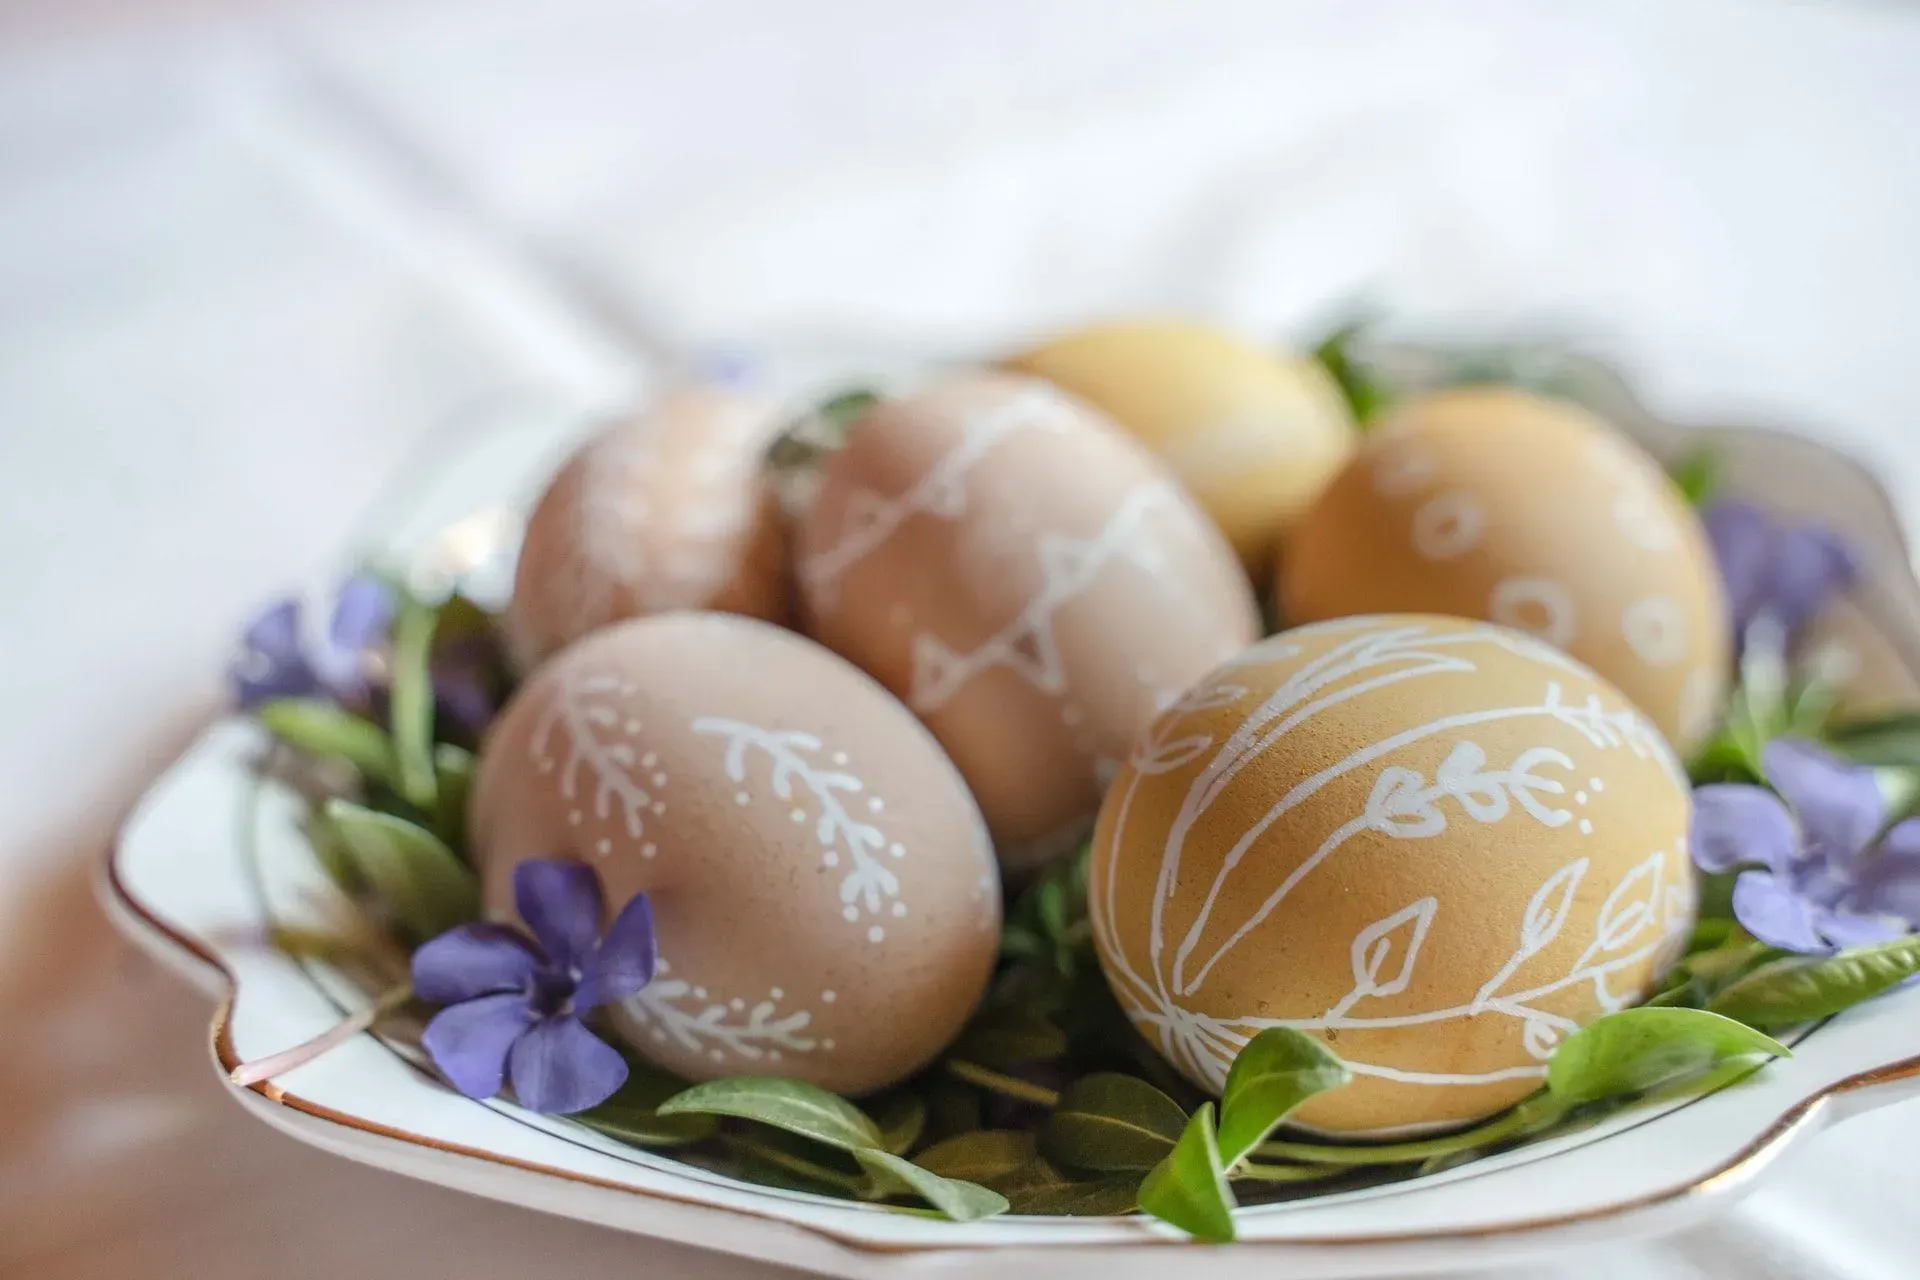 Amazing Easter in Spain facts for everyone.